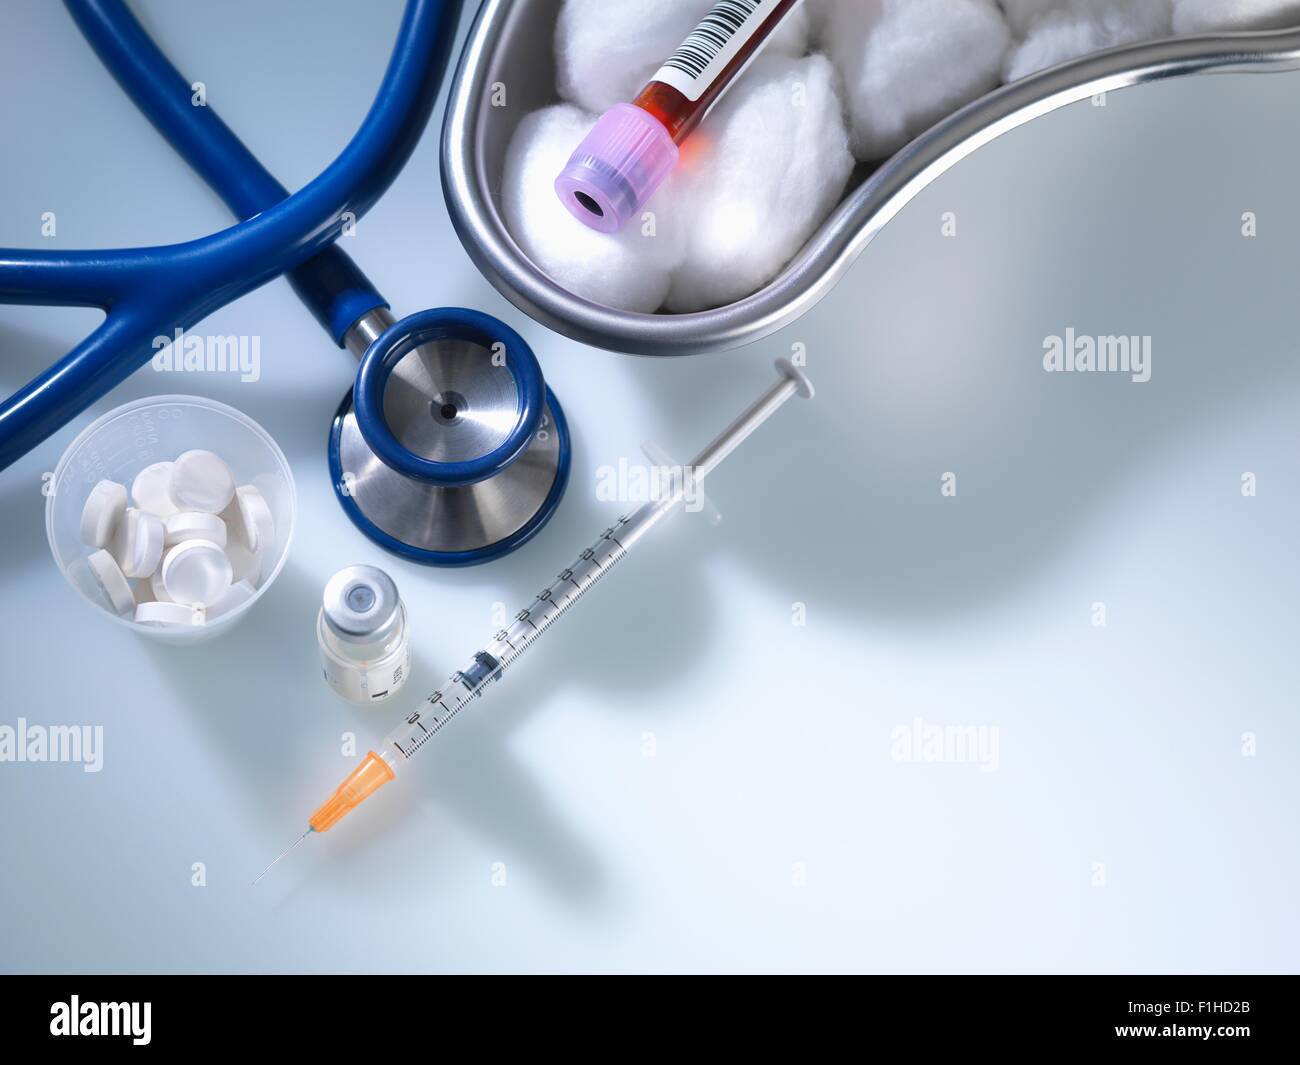 Variety of medicine and medical equipment in hospital Stock Photo